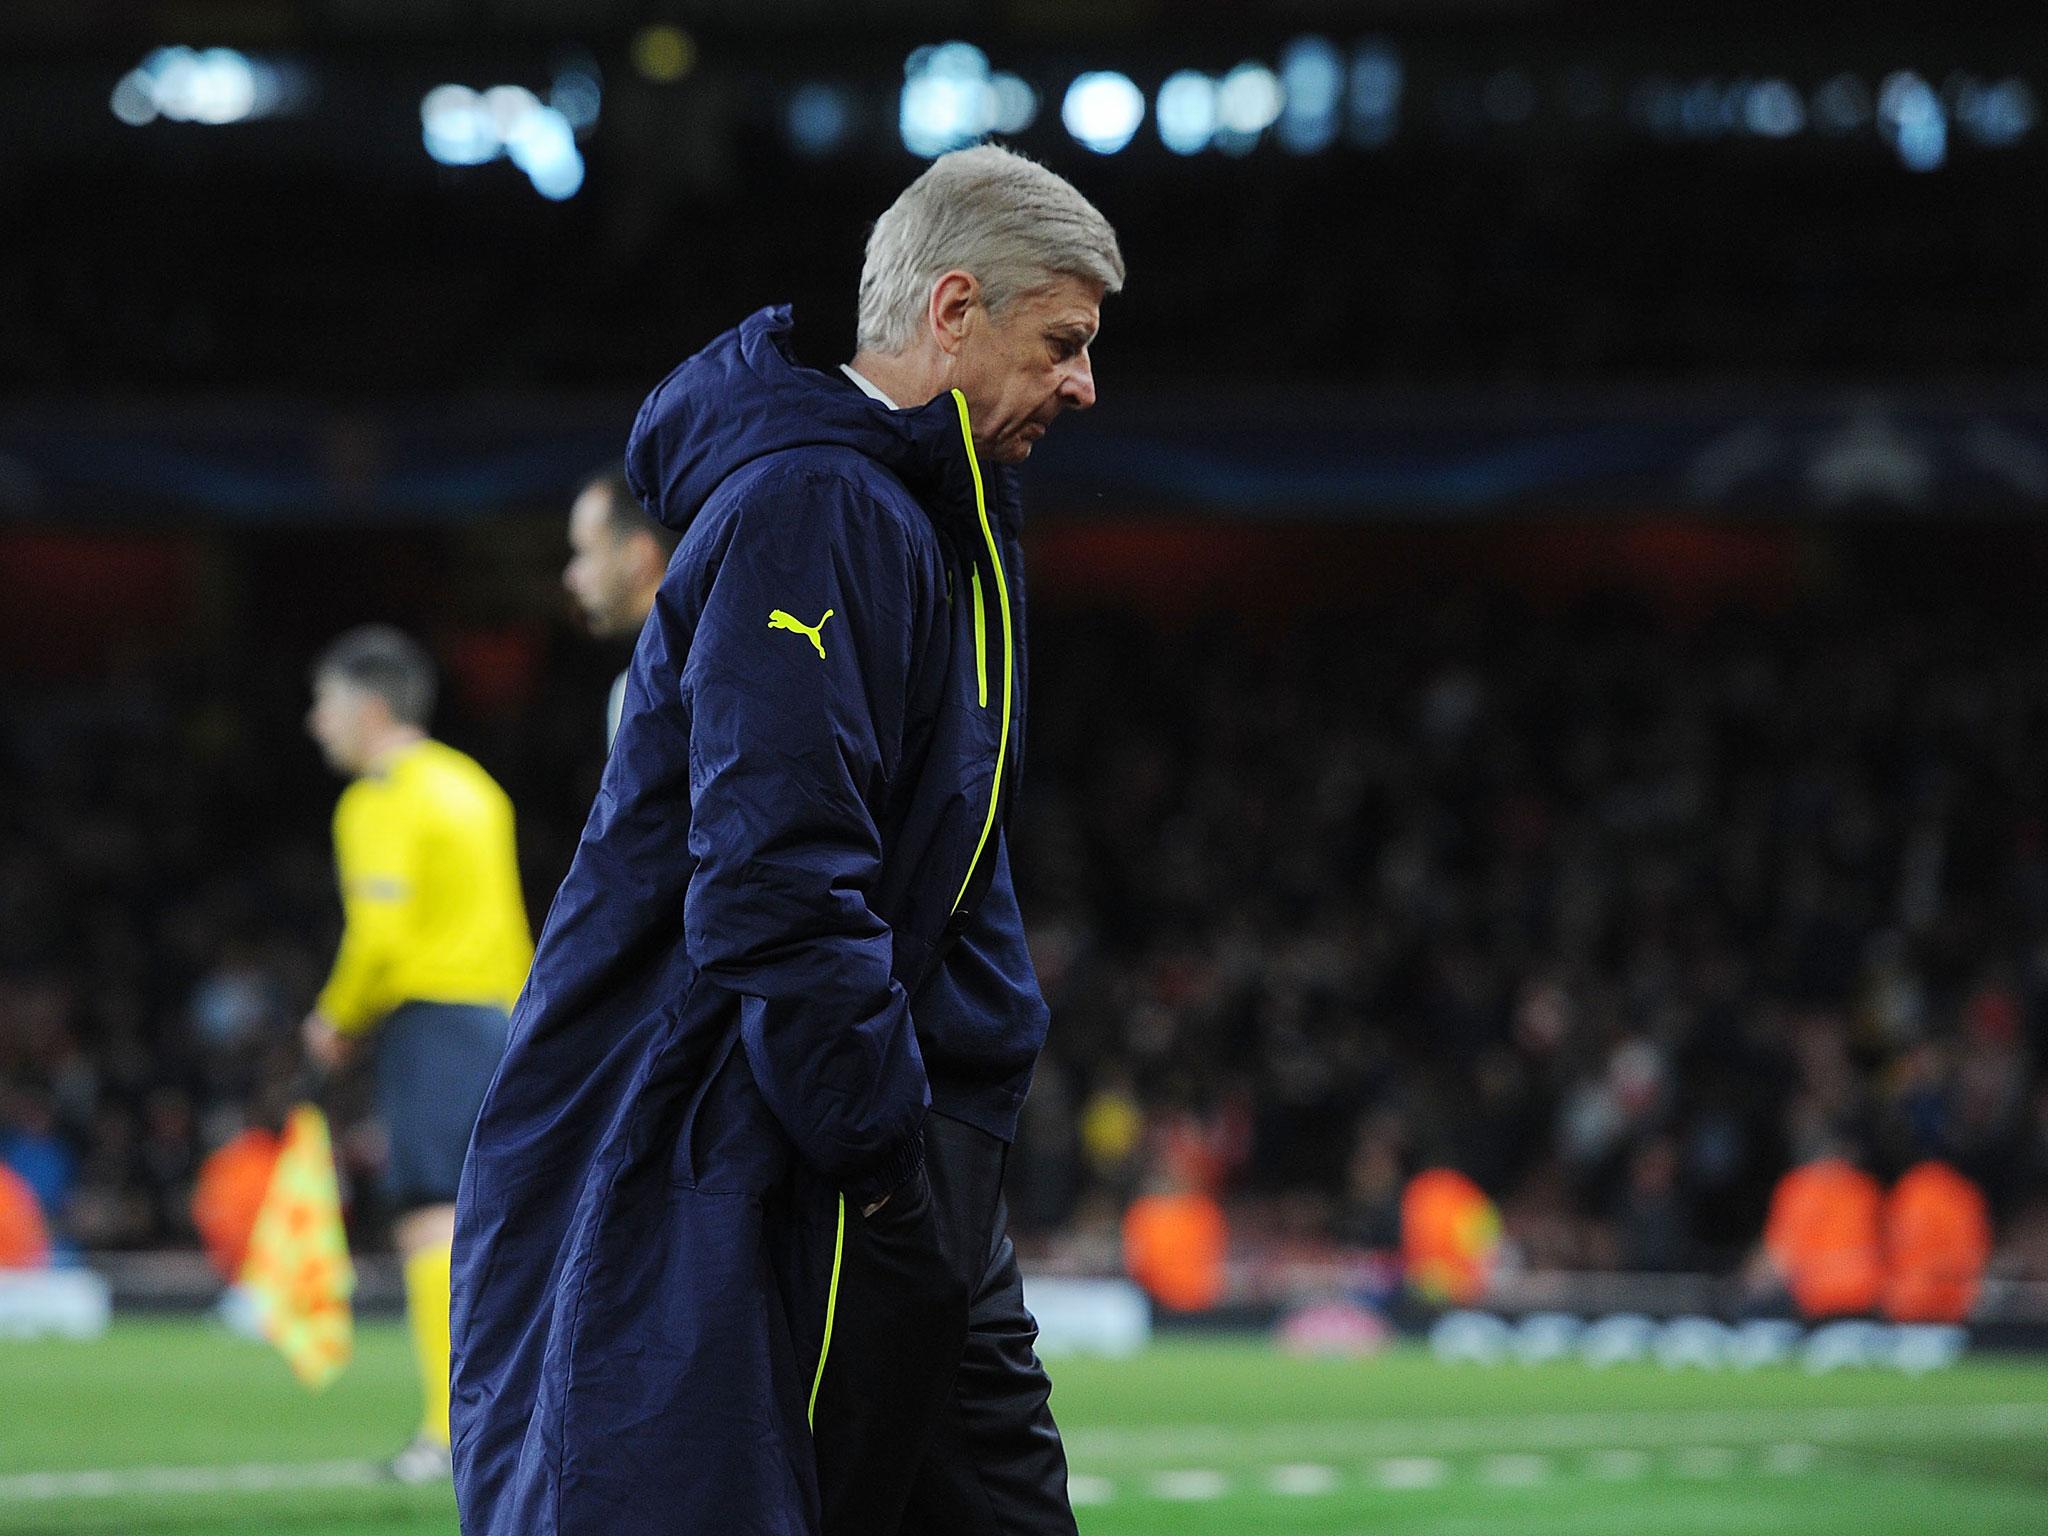 Wenger has endured one of his toughest periods as Arsenal manager